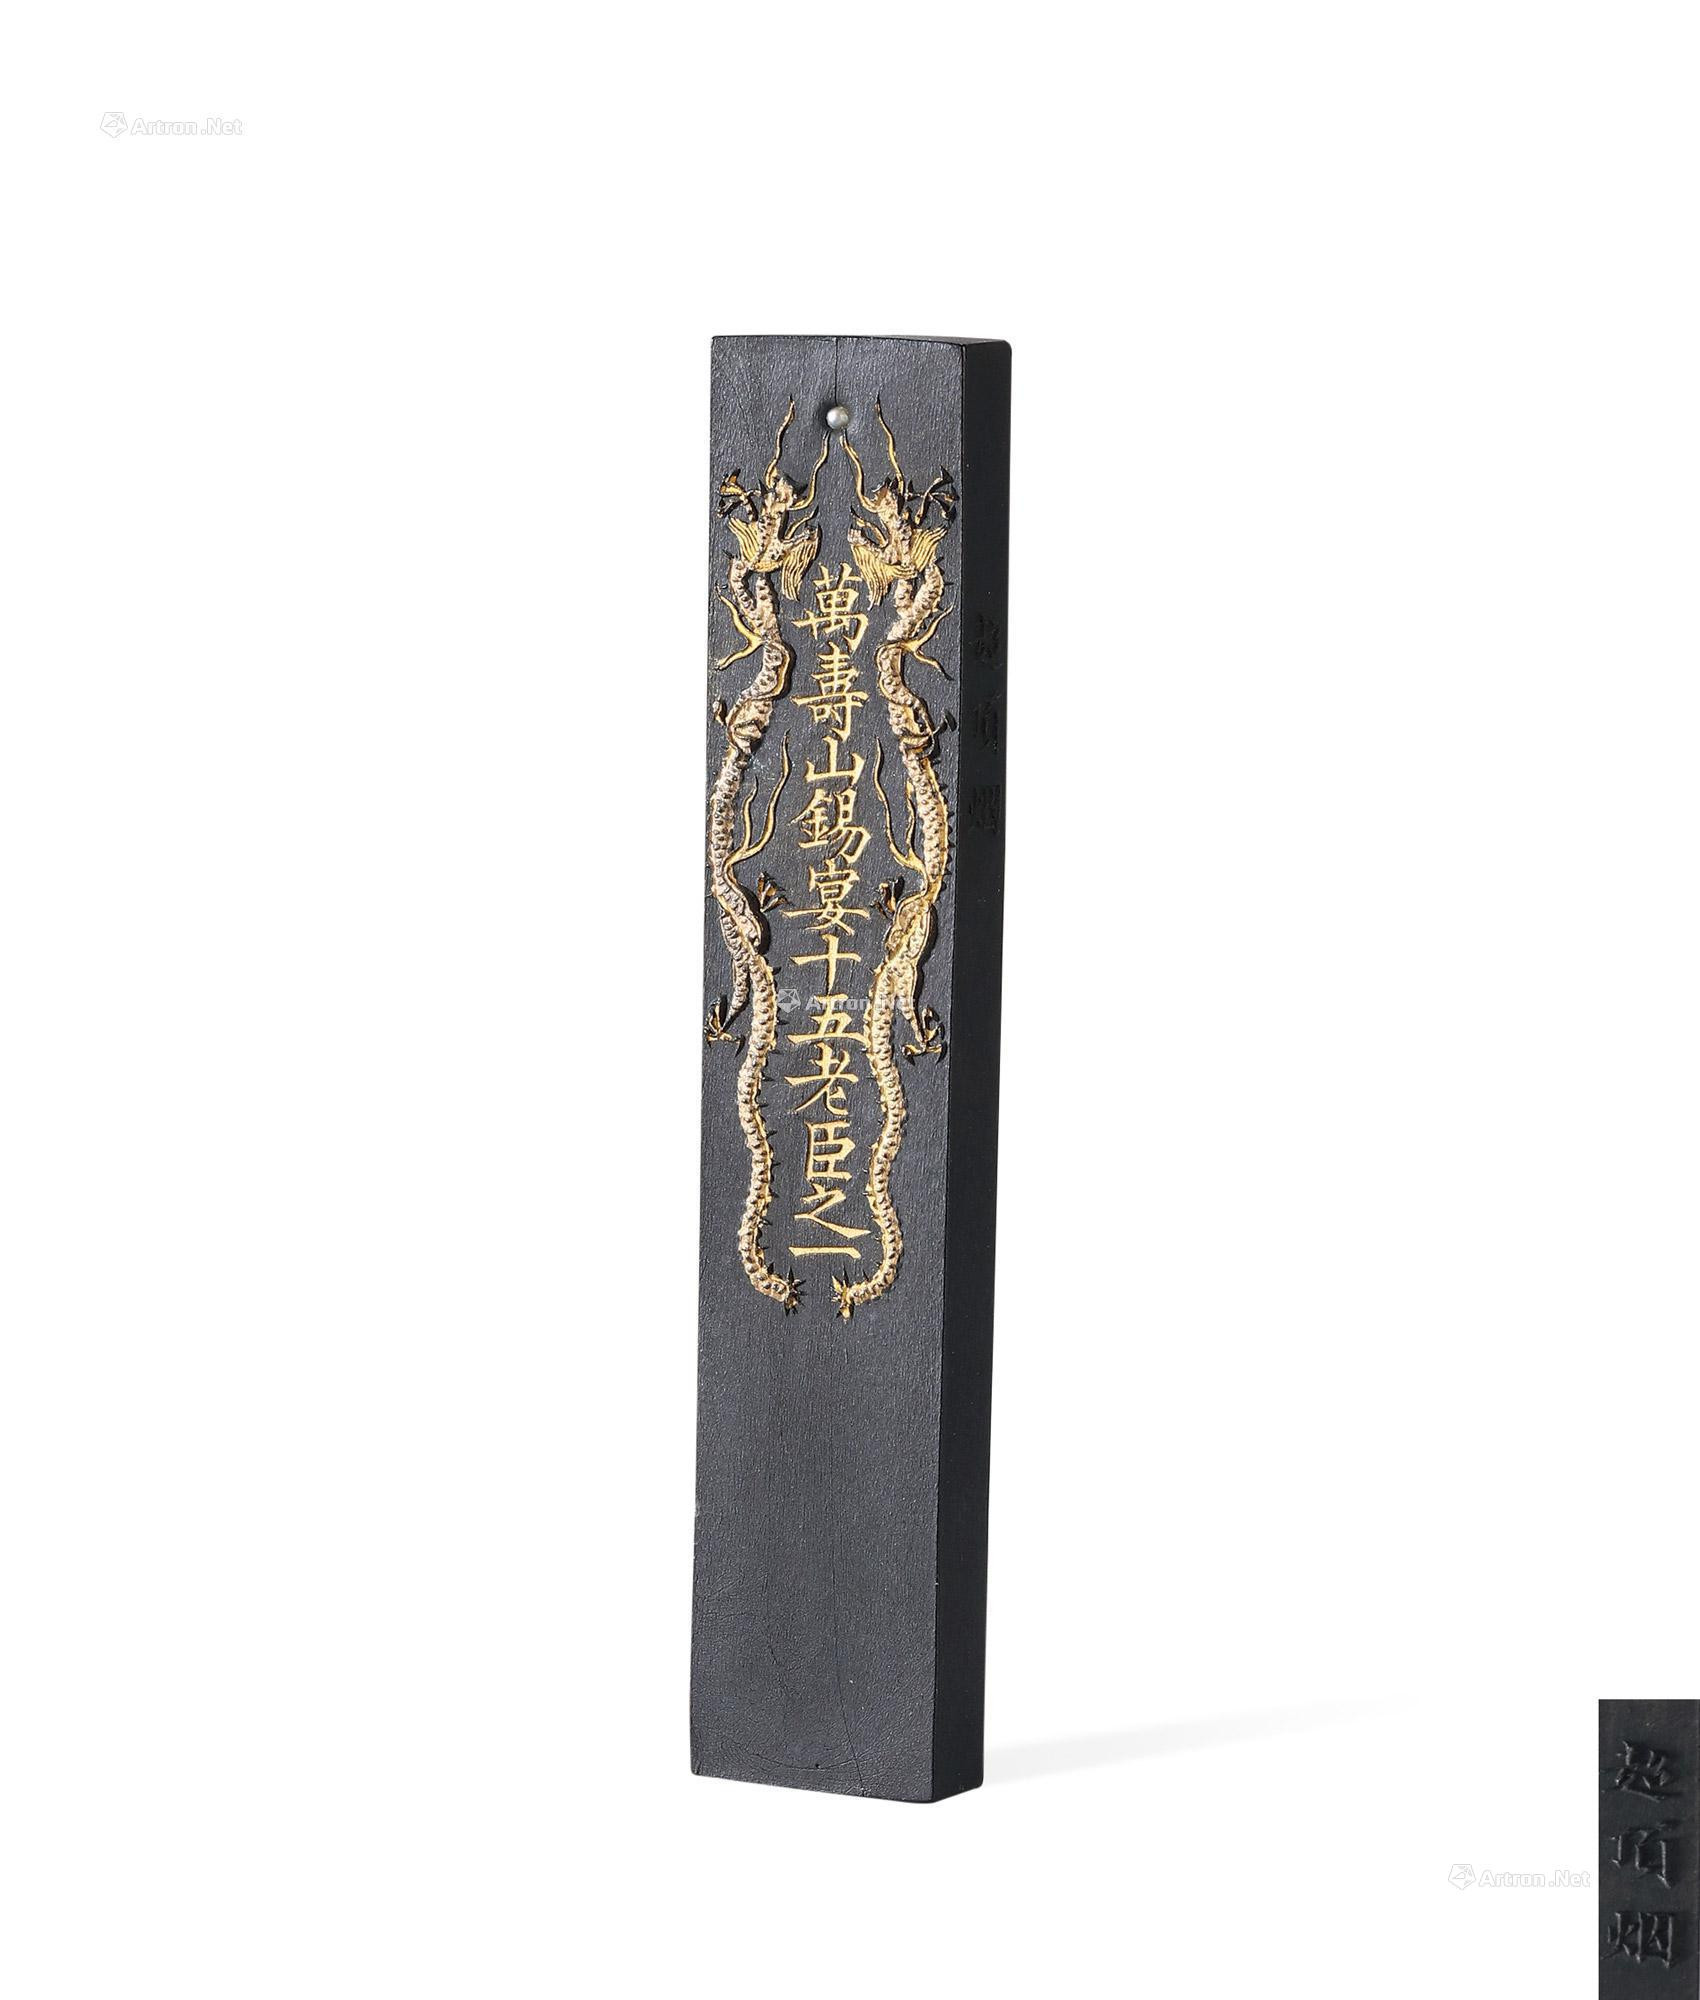 PEARL INLAID INK STICKS WITH DESIGN OF FIGURAL MADE BY CAO LISHENG